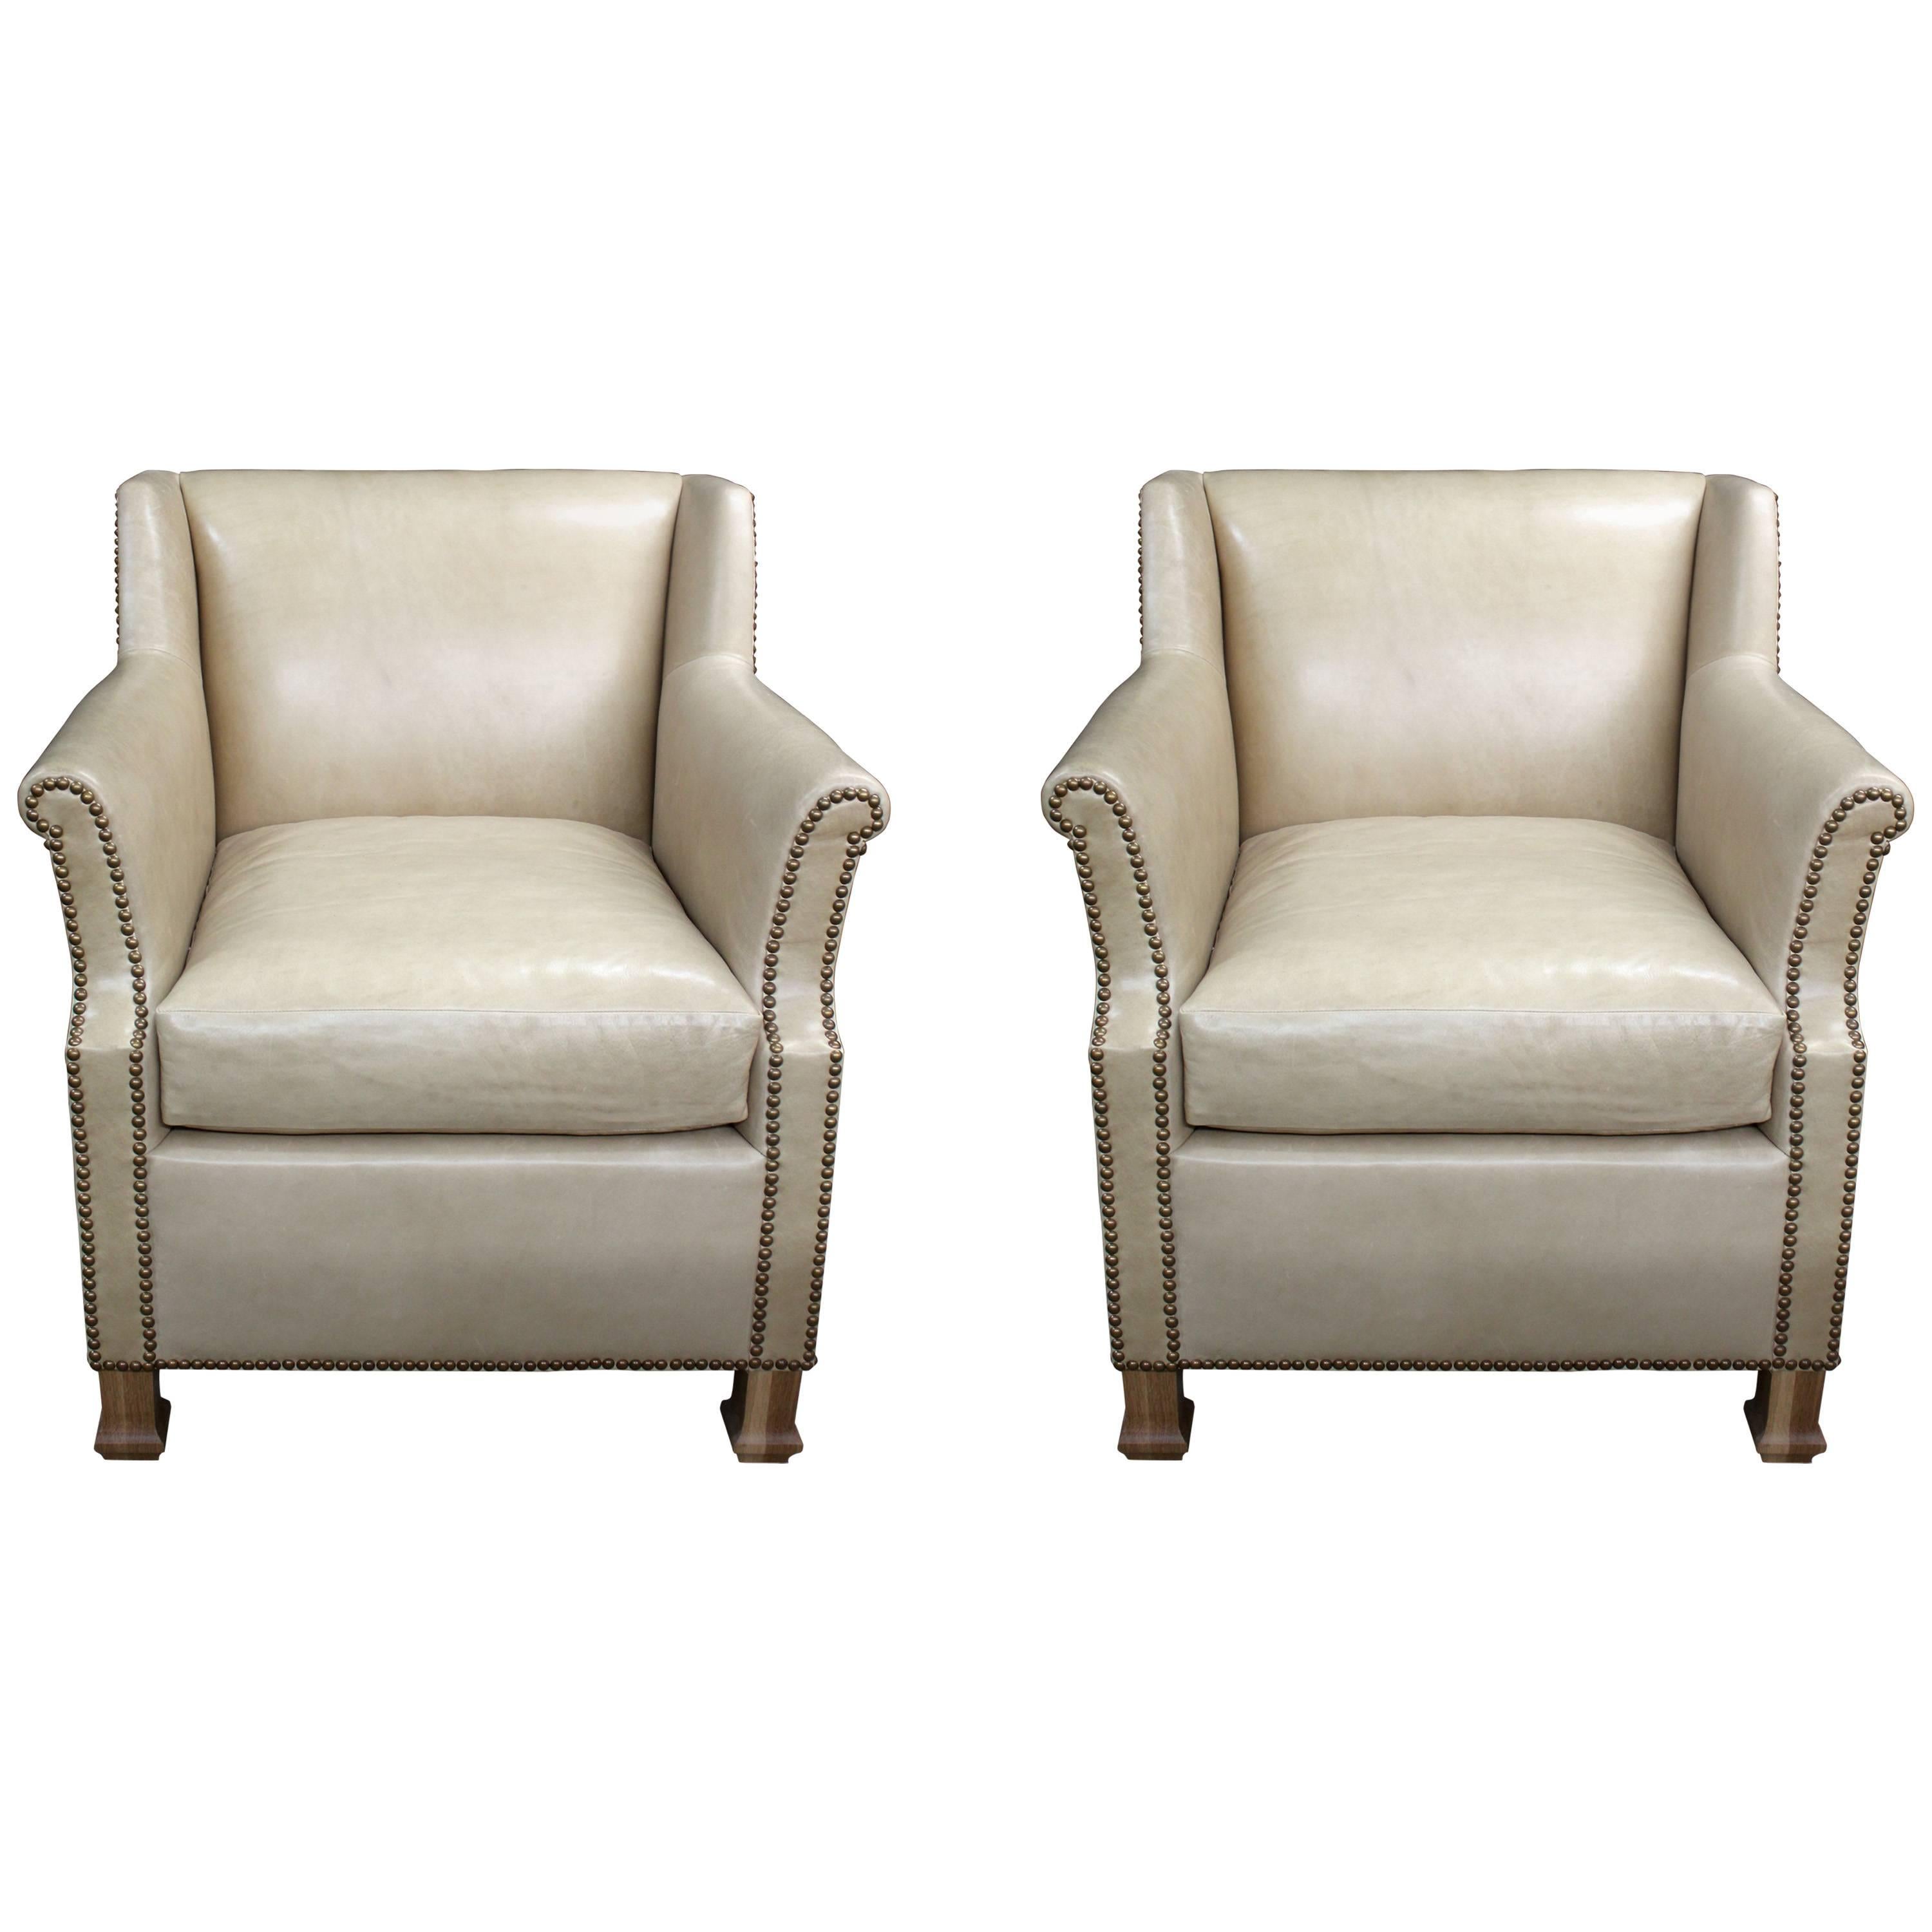 Pair of Custom Leather Club Chairs in a Butter Soft "cafe au lait" Leather